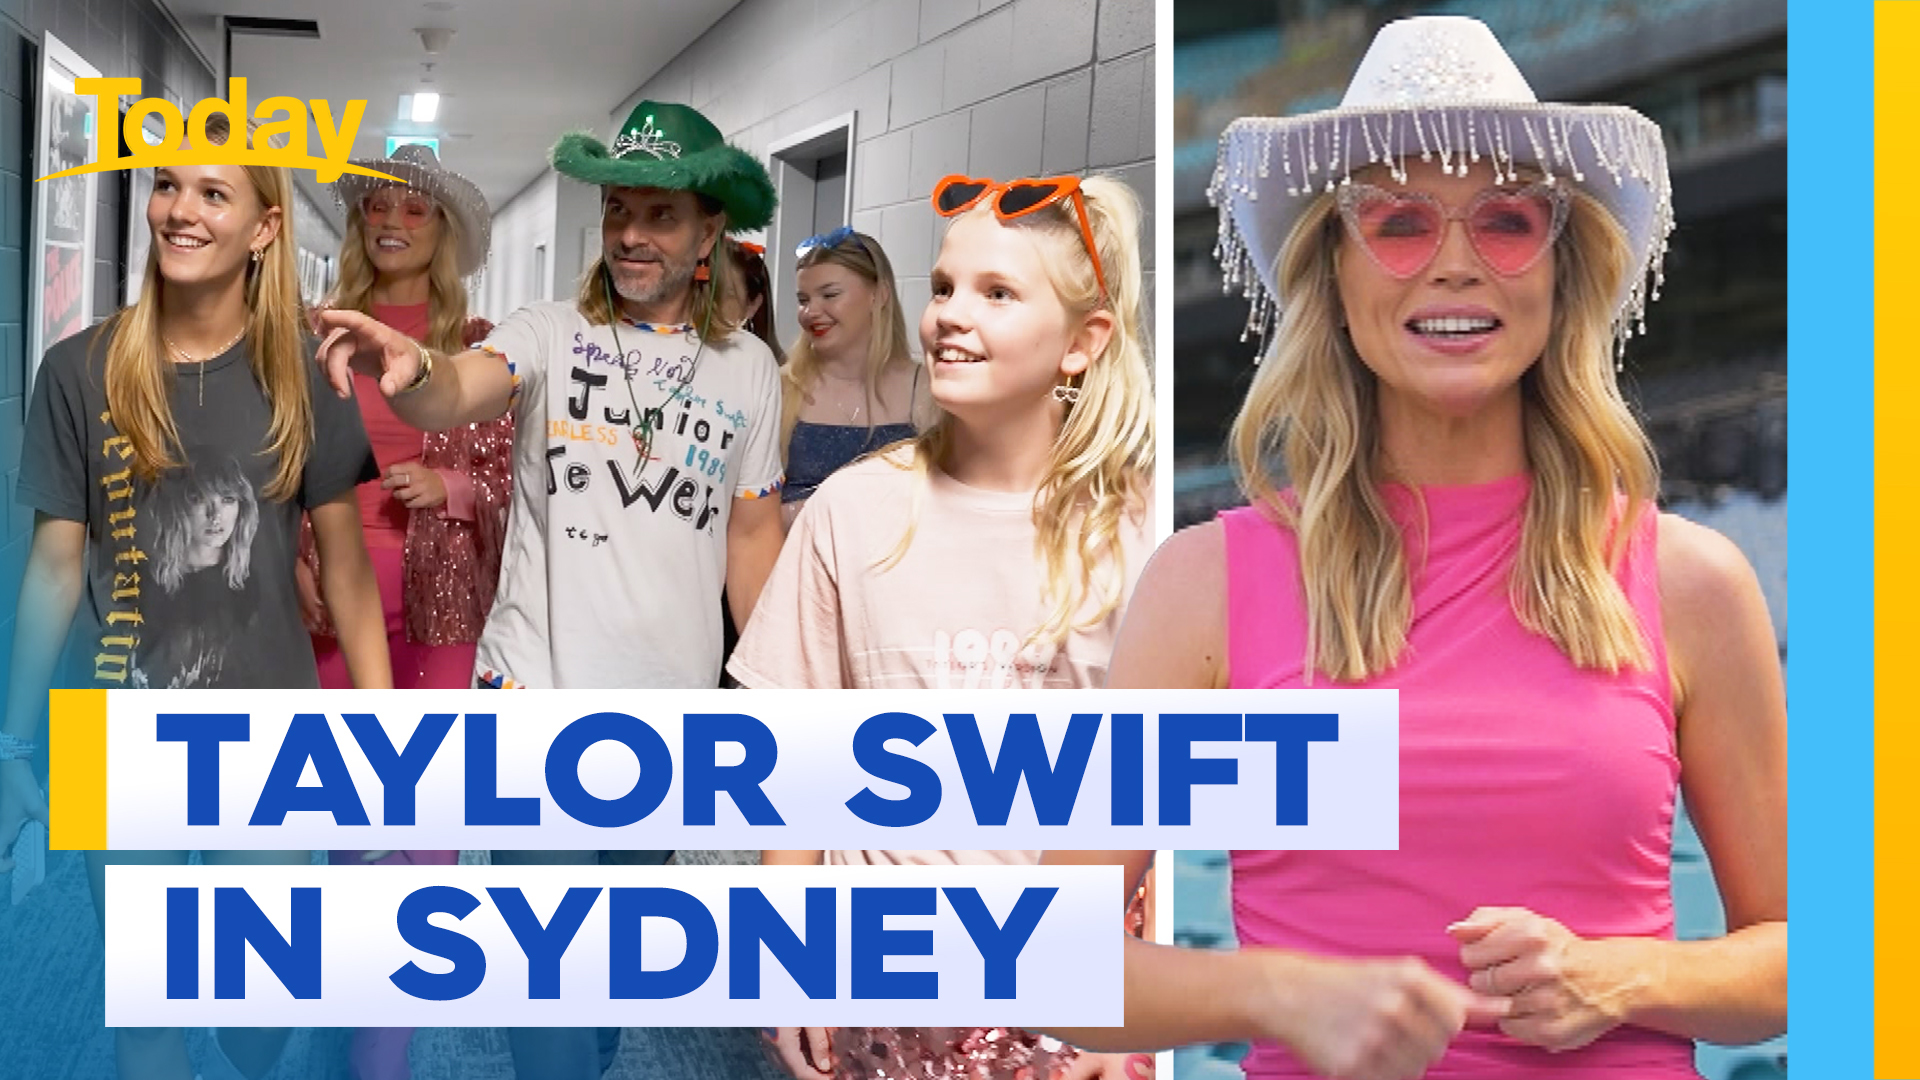 Sydneysiders excited for Taylor Swift's Eras Tour